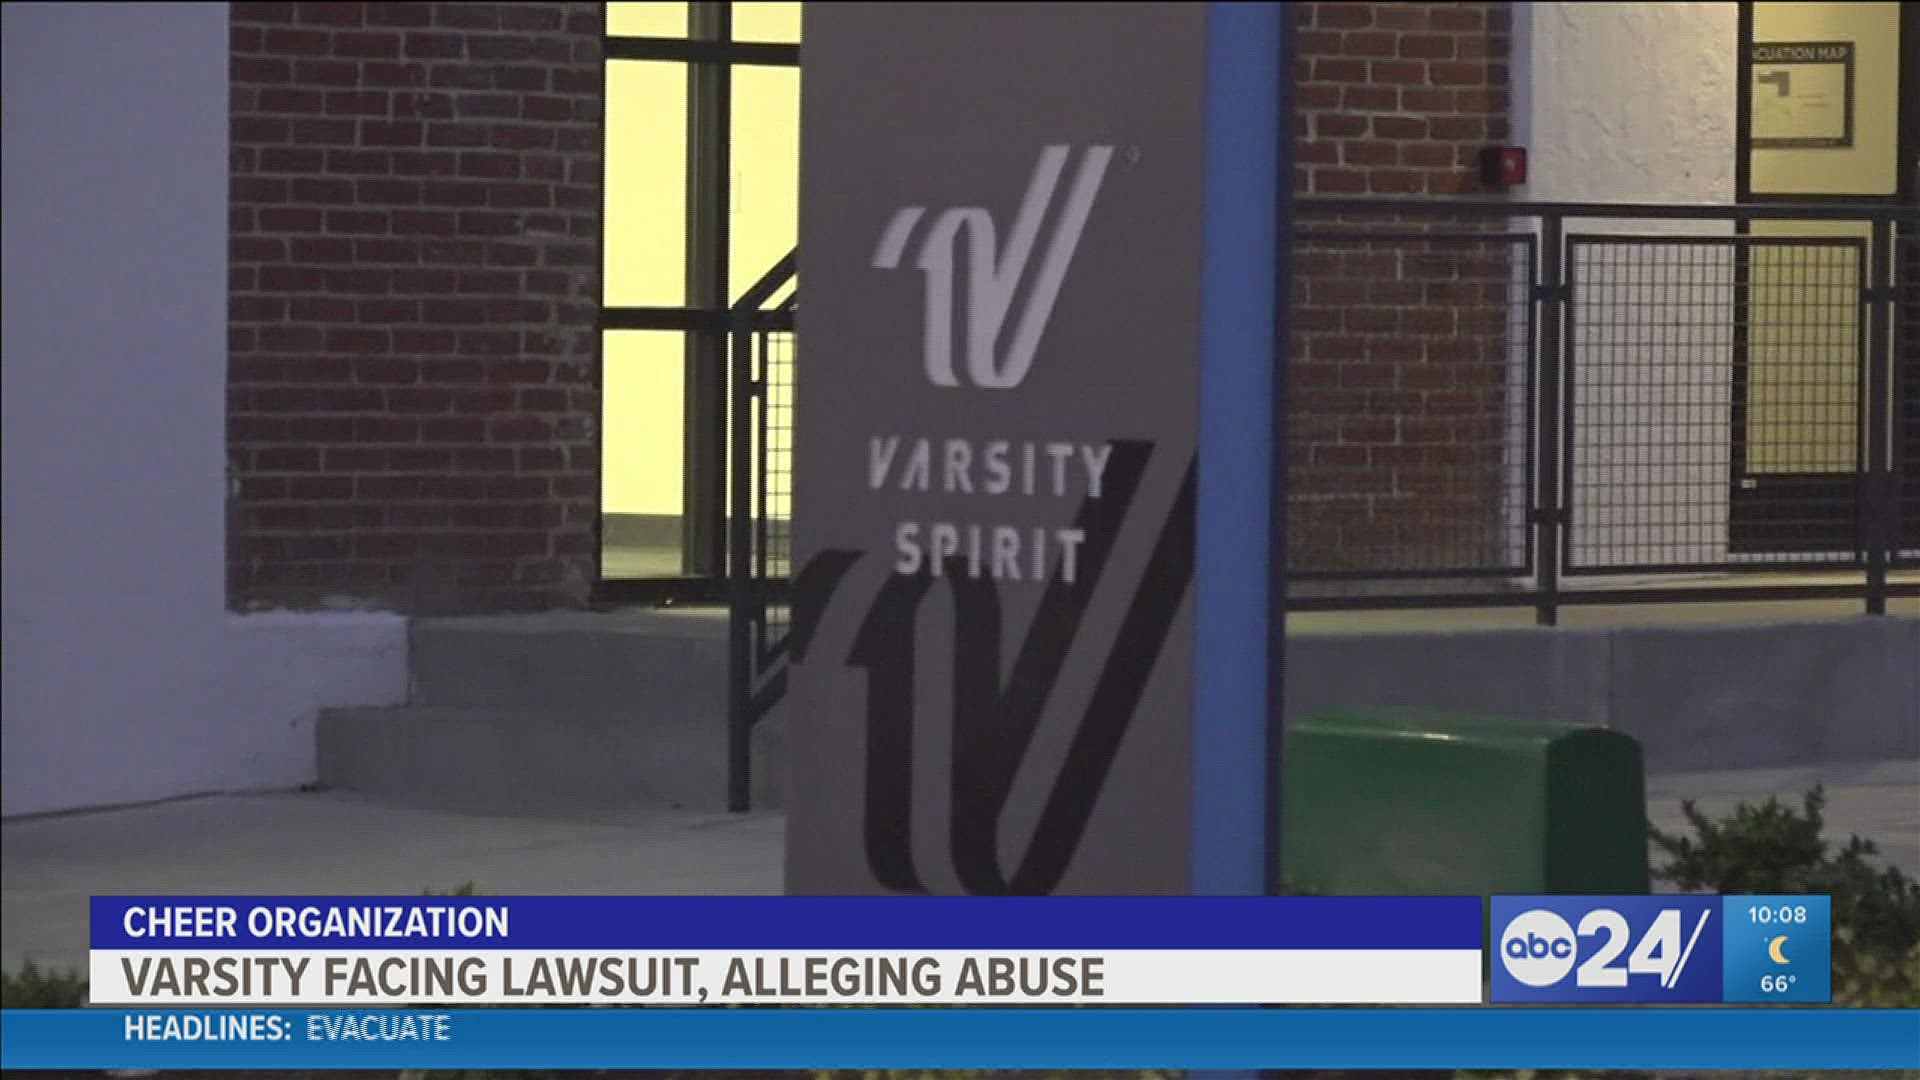 The lawsuit claims the business model and policies for the cheerleading organizations have created a system allowing abuse, and sexual abuse, of the young athletes.